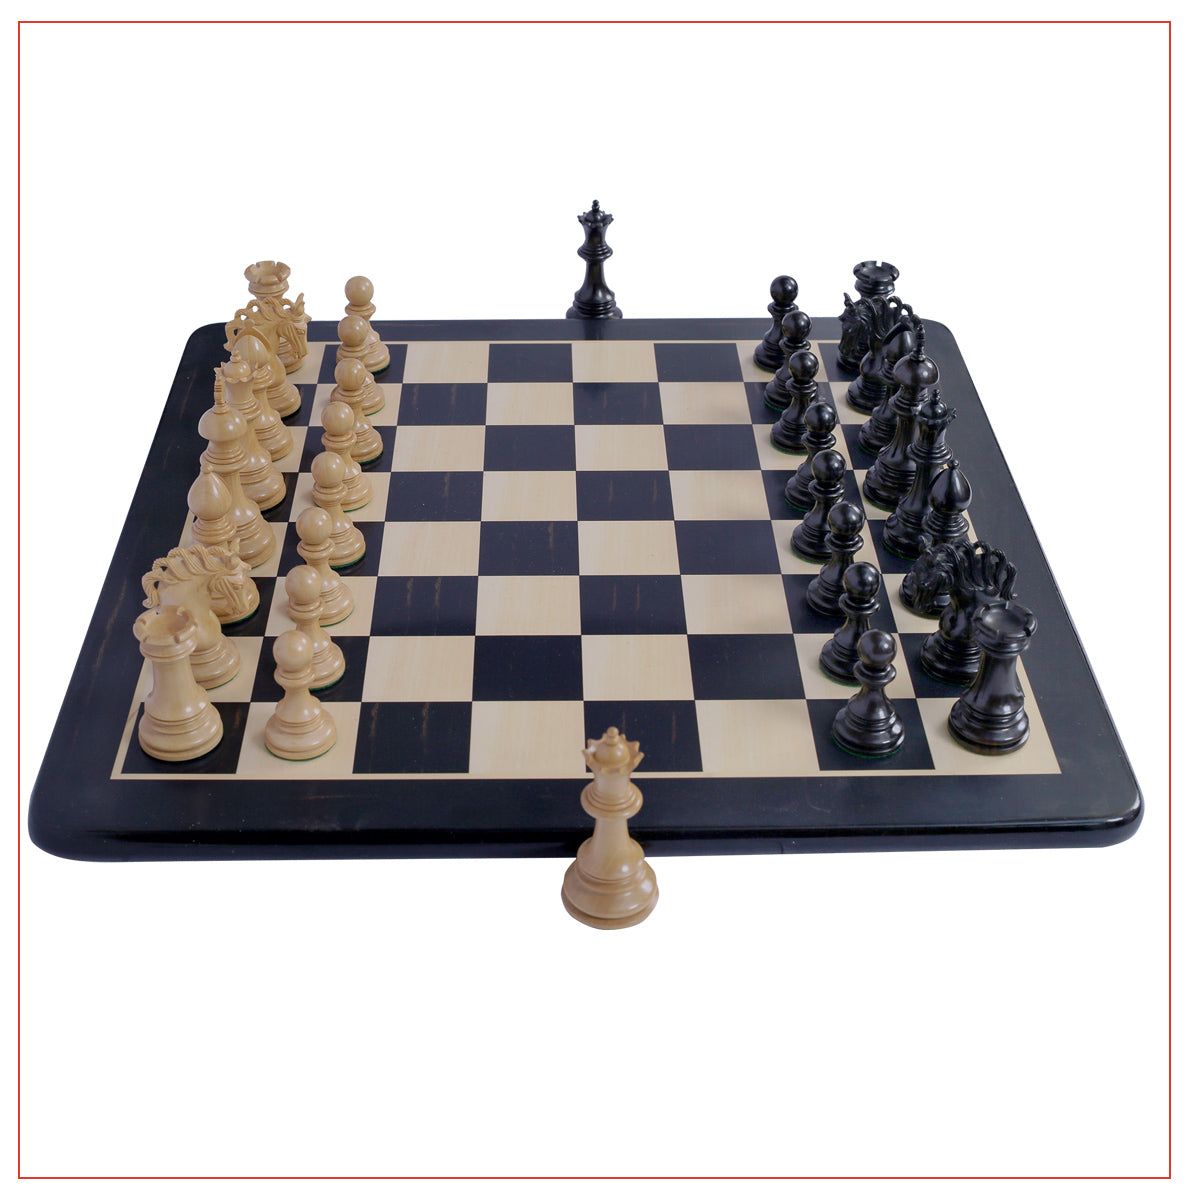 Westminster Series 4.4 Luxury Chess set in Ebony and Box Wood – Staunton  Castle